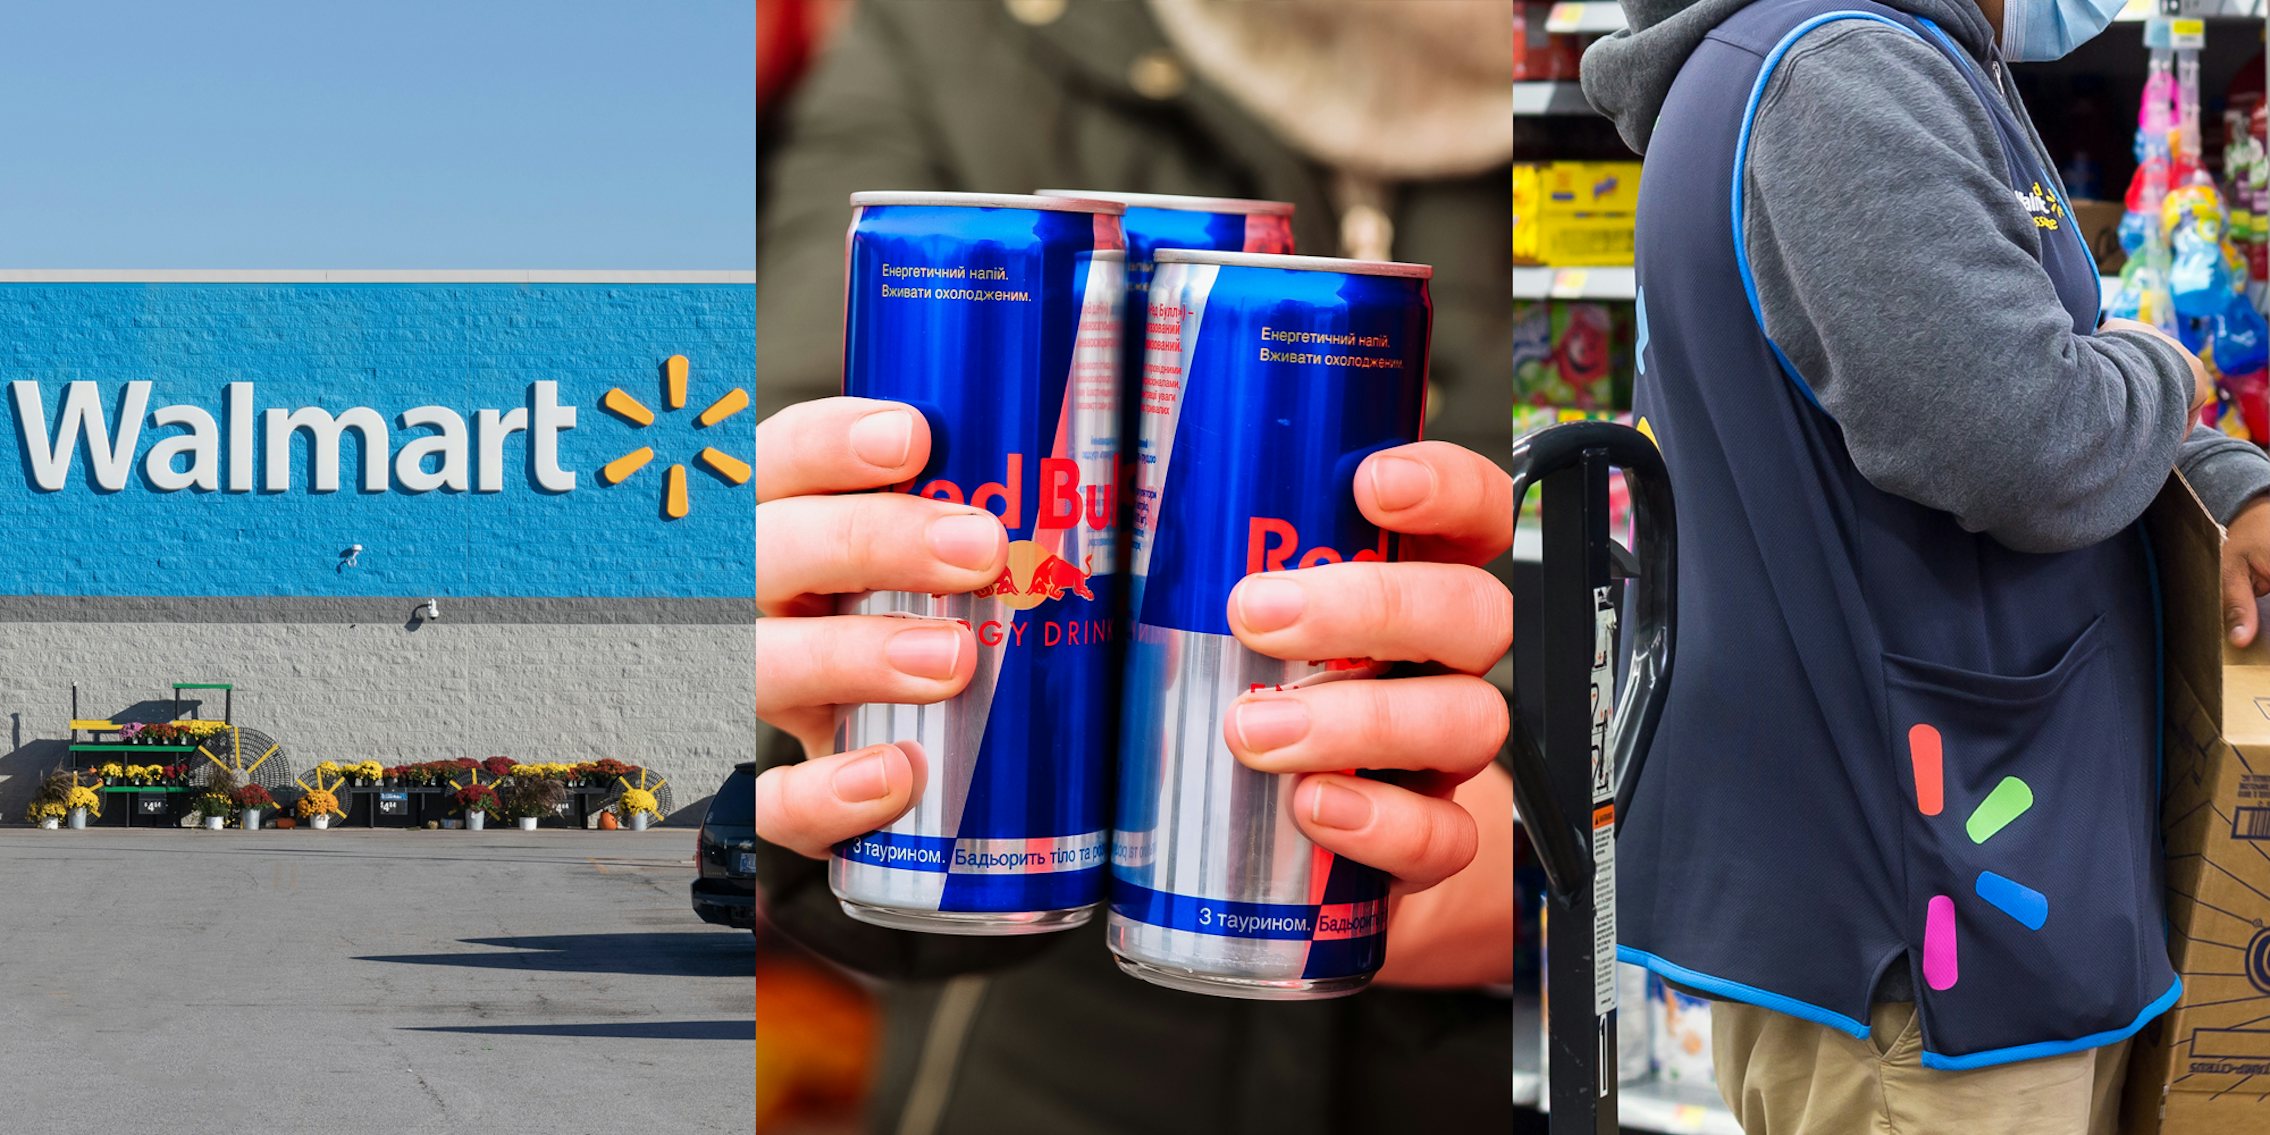 Walmart building with sign *l) hands holding 3 Red Bull energy drinks (c) Walmart employee with branded vest on (r)